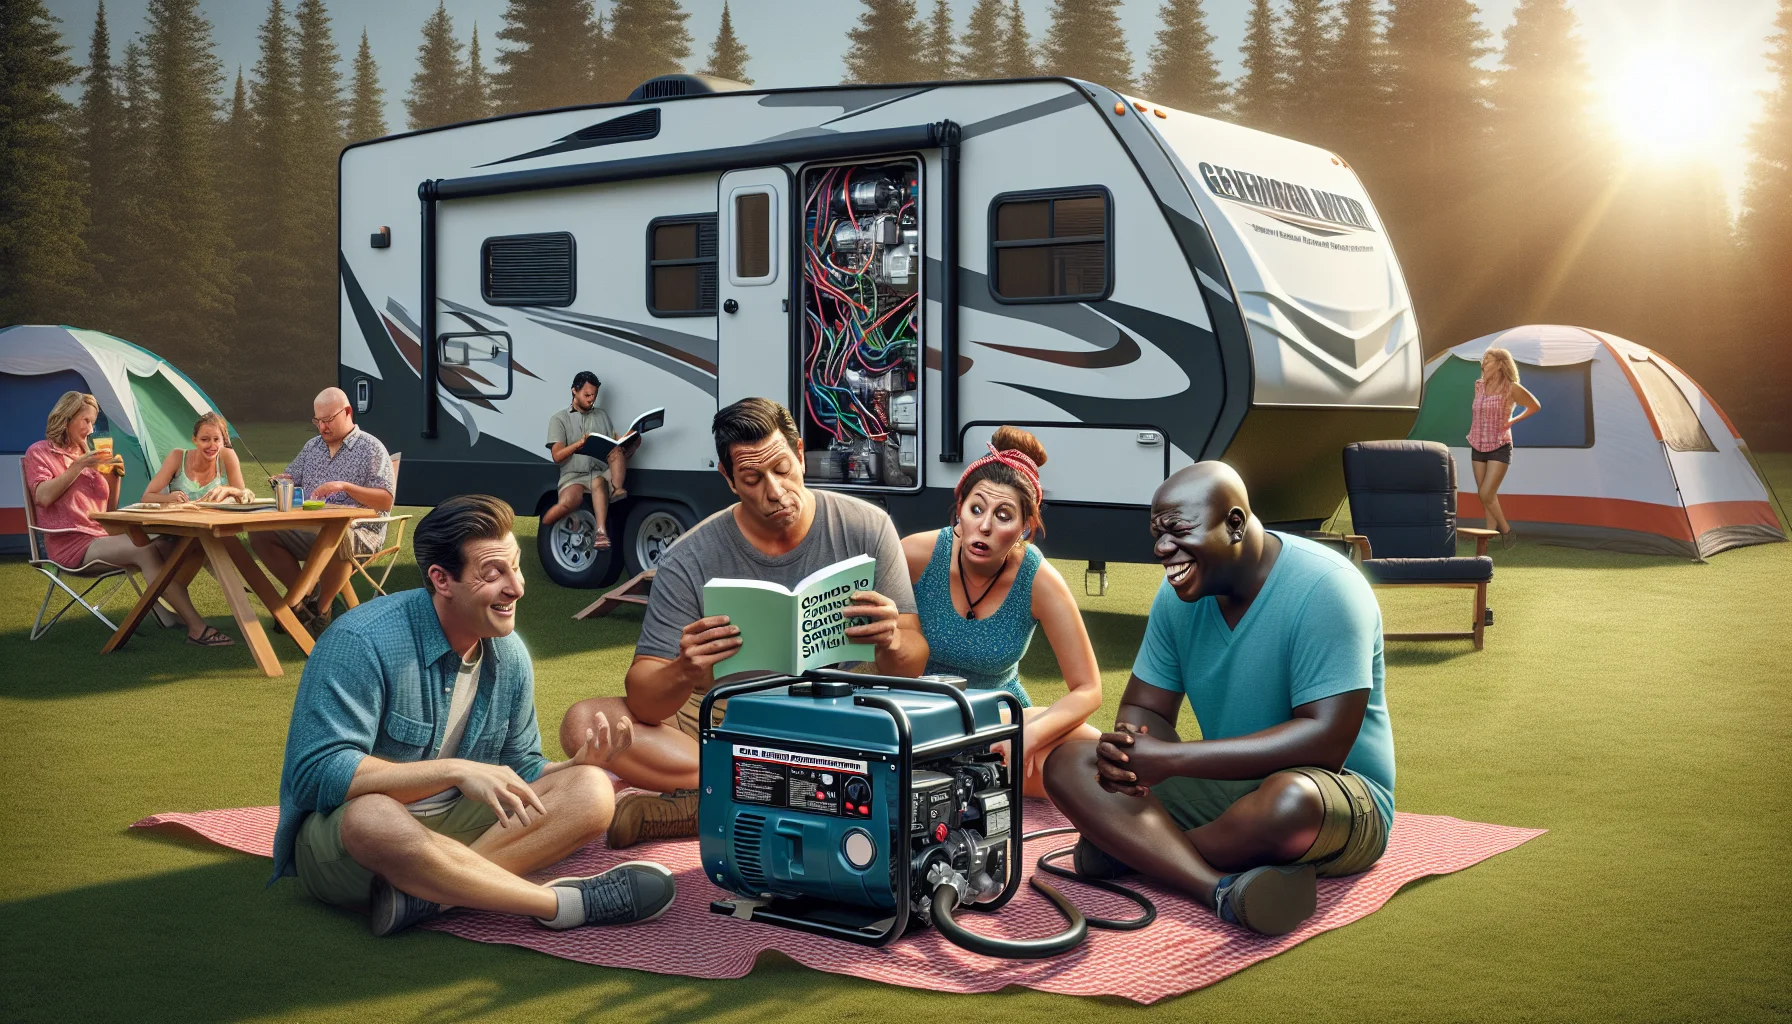 Imagine a lighthearted and slightly comical scene unfolding in a summer campground. A group of three friends with diverse backgrounds: a Caucasian man, a Hispanic woman, and a Black man are huddled together, busily studying a guidebook about 'How to use RV Generator Transfer Switch.' Amidst them sits a huge RV generator transfer switch, almost comically large, situated next to their tiny caravan. Their facial expressions exhibit amusement and bewilderment. The sun is shining brightly, and there are other campers in the background going about their activities, blissfully unaware of the spectacle. The image portrays an underlining notion of enticing people to generate electricity.